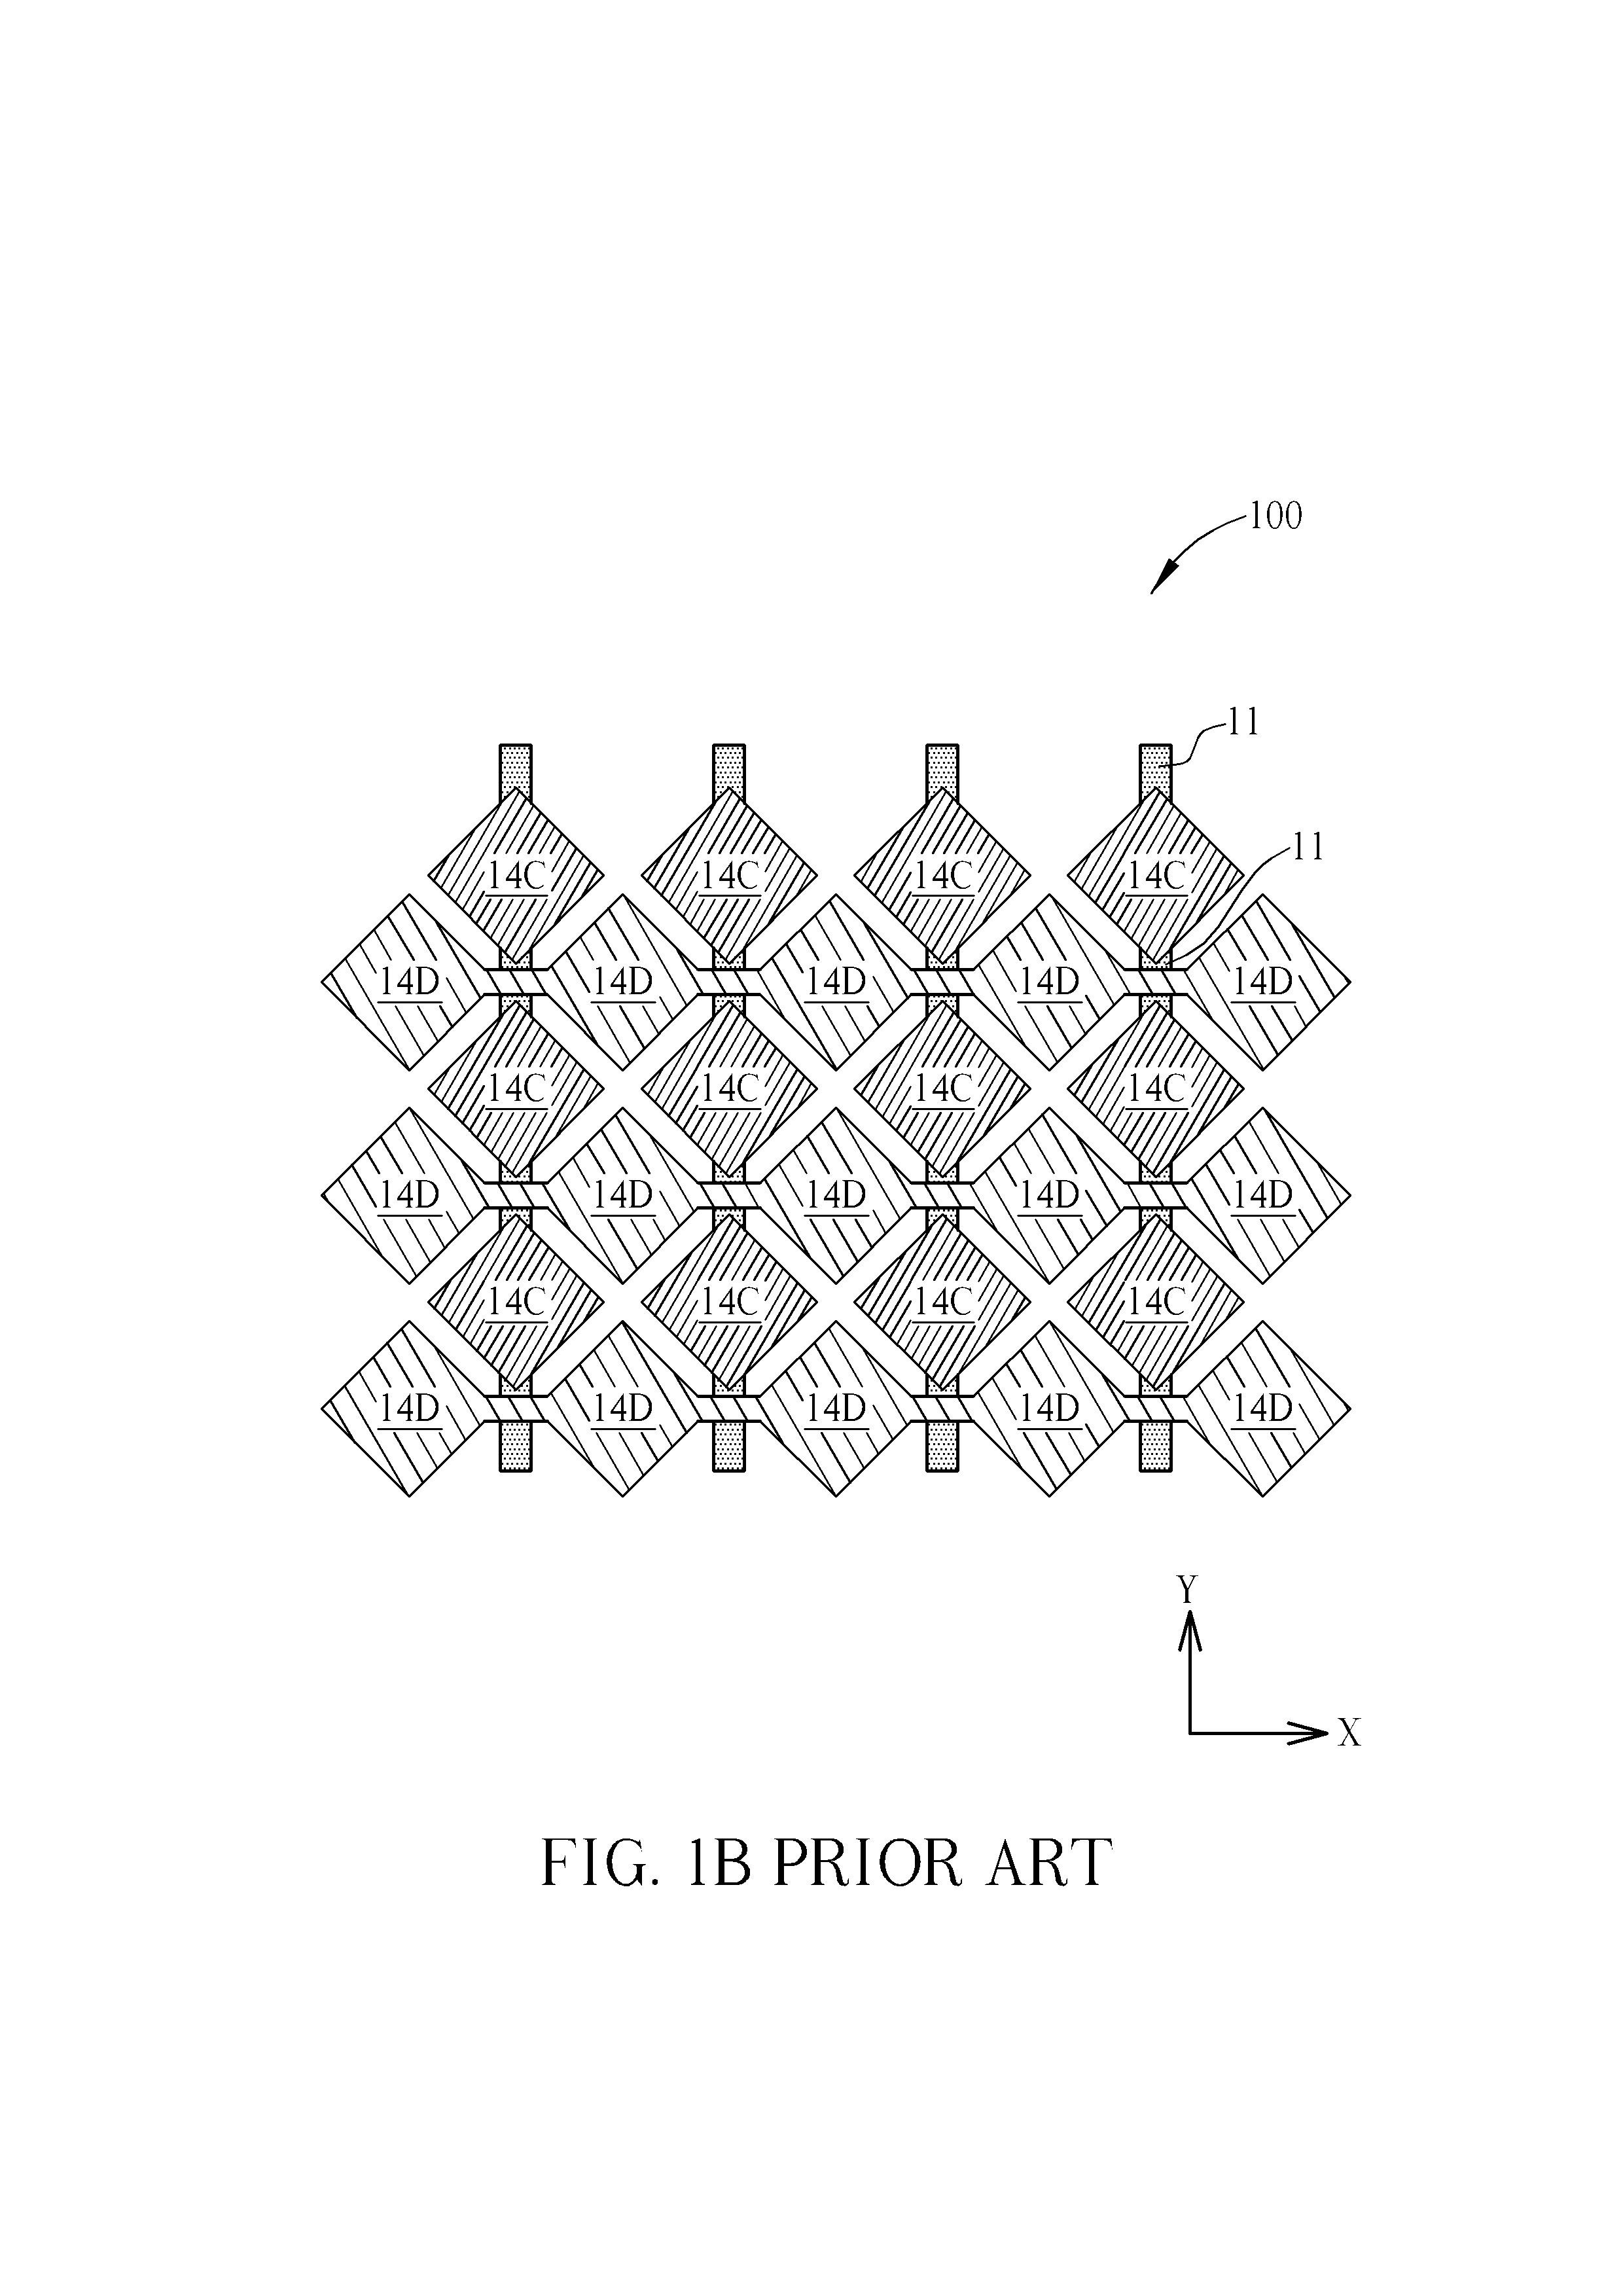 Capacitive Touch Display Device